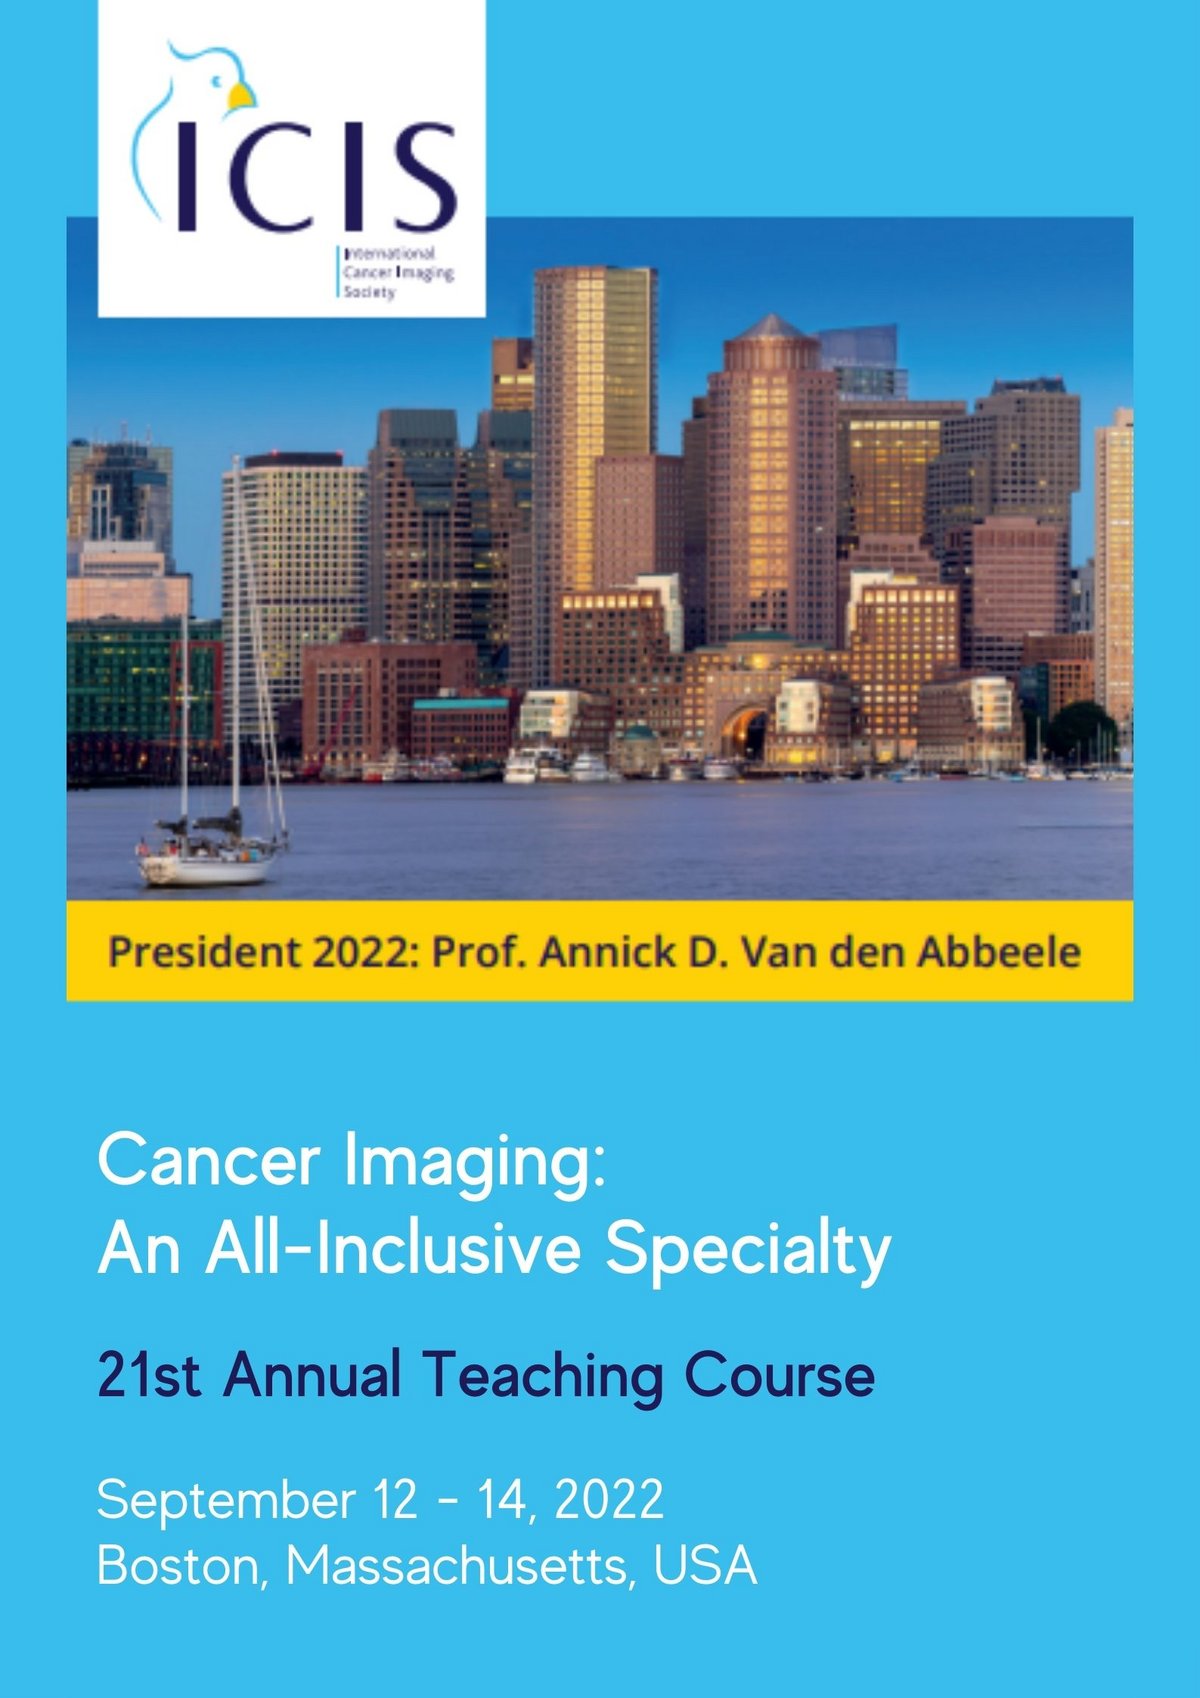 International Cancer Imaging Society (ICIS) Meeting and 21st Annual